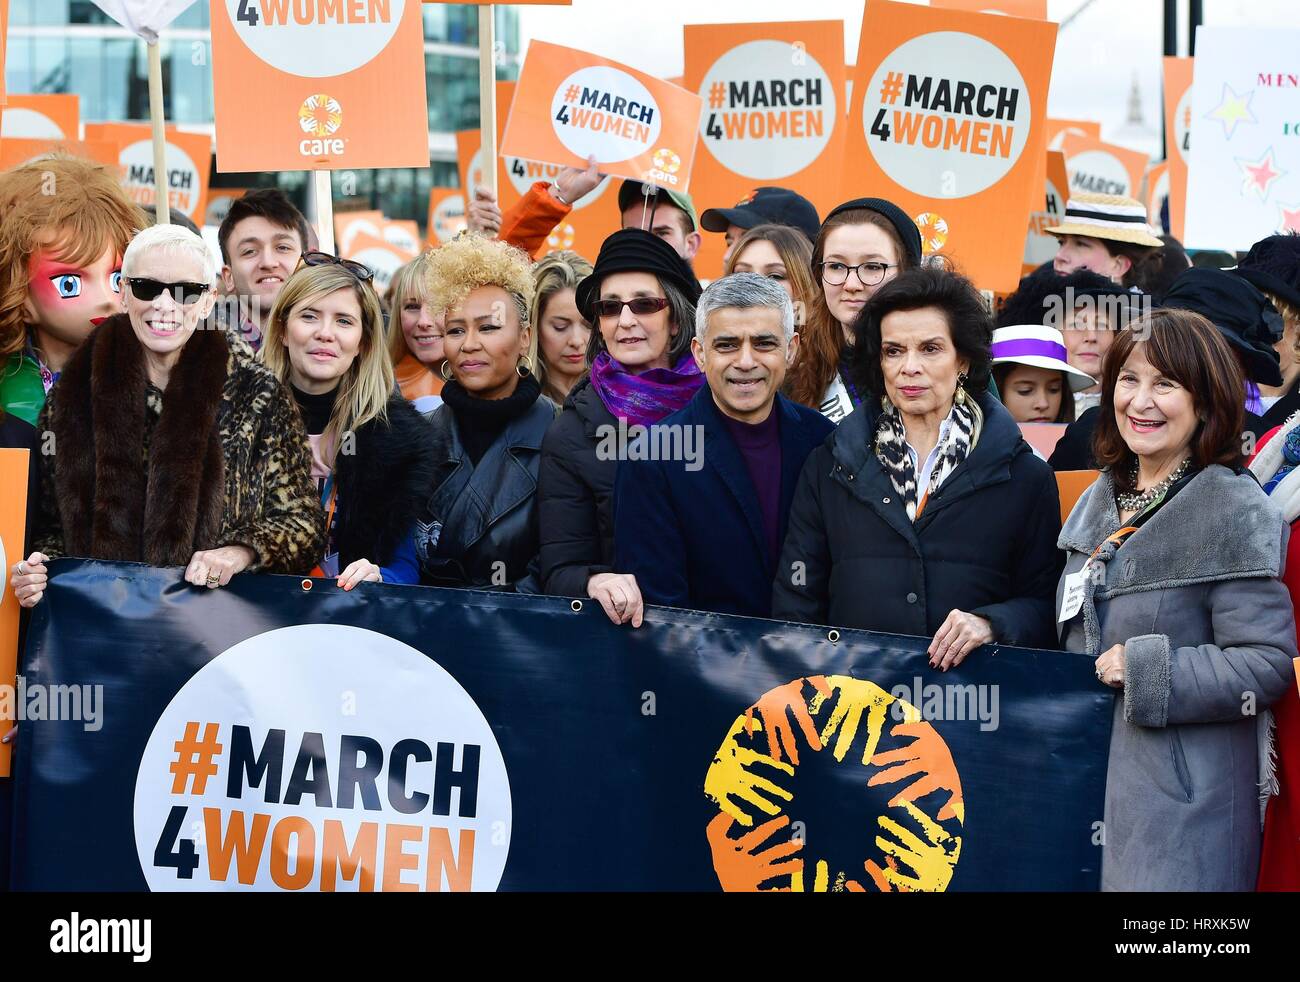 Annie Lennox, Emeli sande, Mayor of London Sadiq Khan and Bianca Jagger, at the start of the March4Women event in London, ahead of International Women's Day. Stock Photo